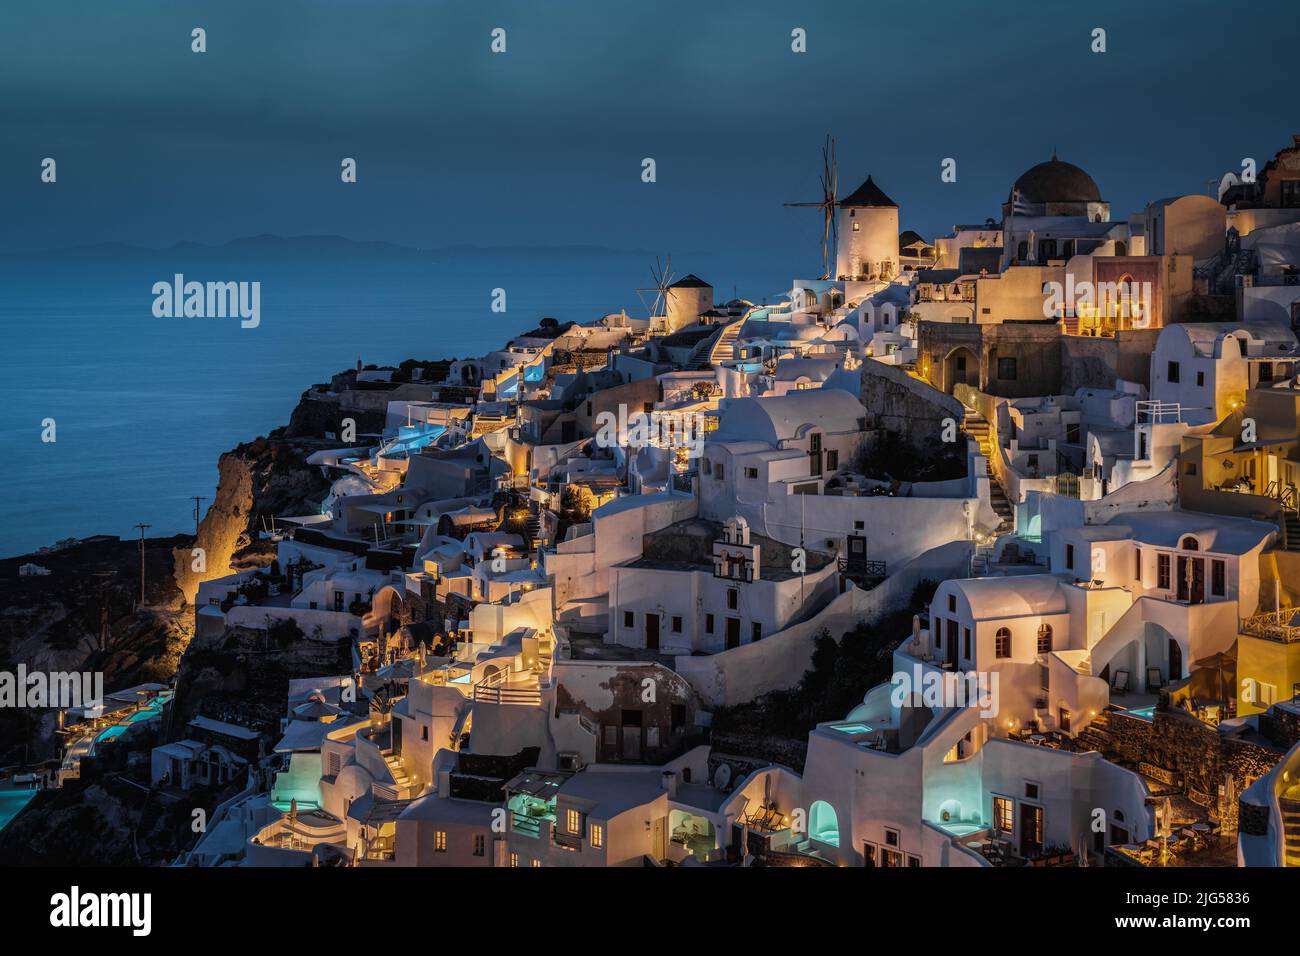 Scenic blue hour at Oia, the most typical village of Santorini and popular honeymoon destination, Greece Stock Photo